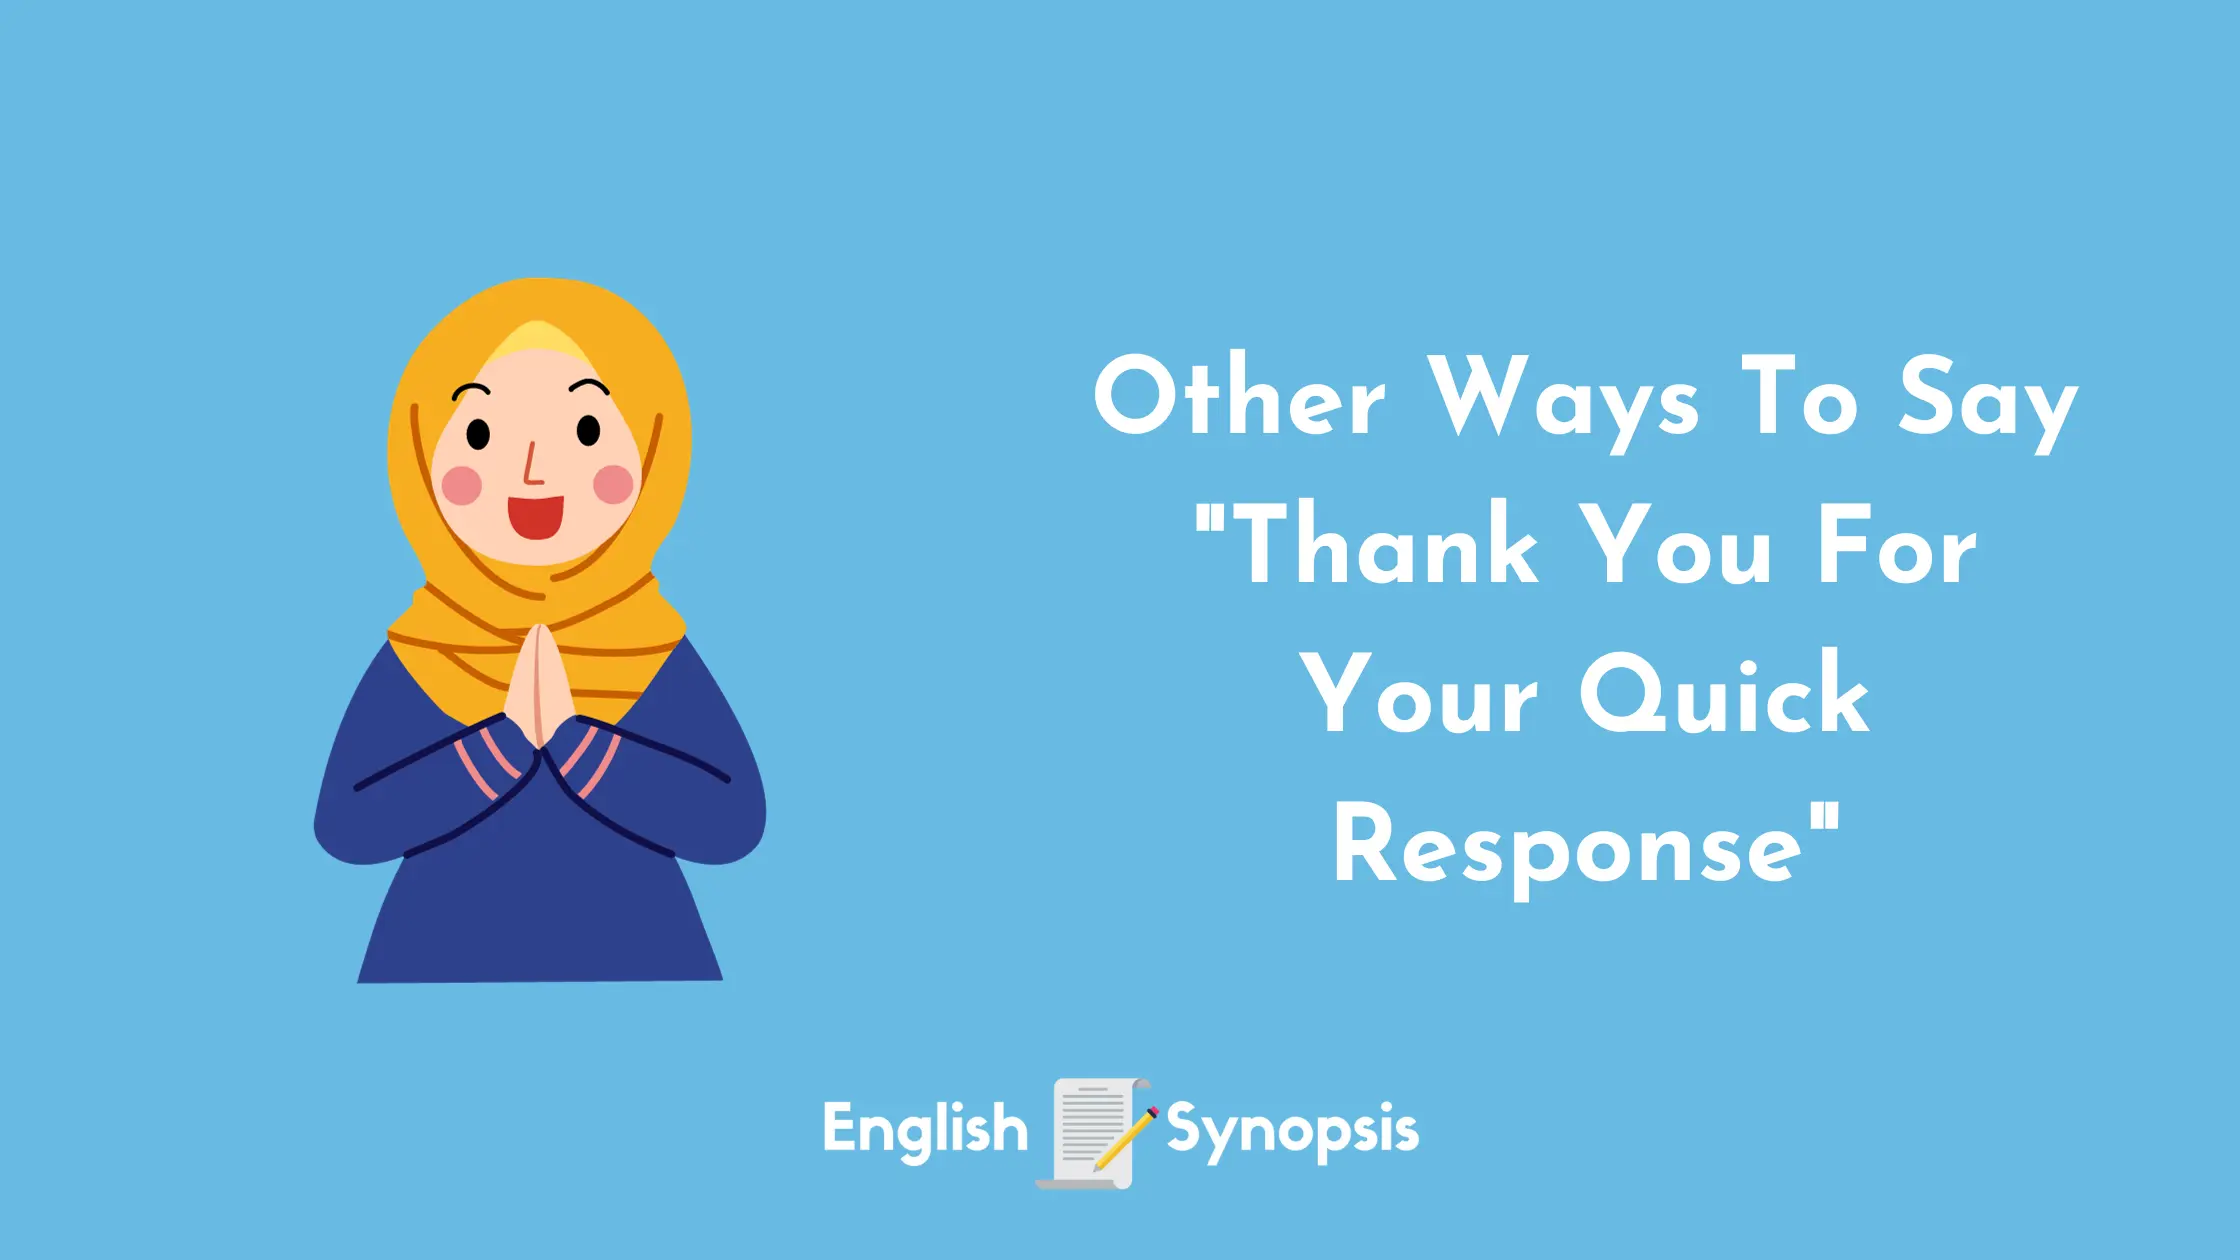 Other Ways To Say "Thank You For Your Quick Response"